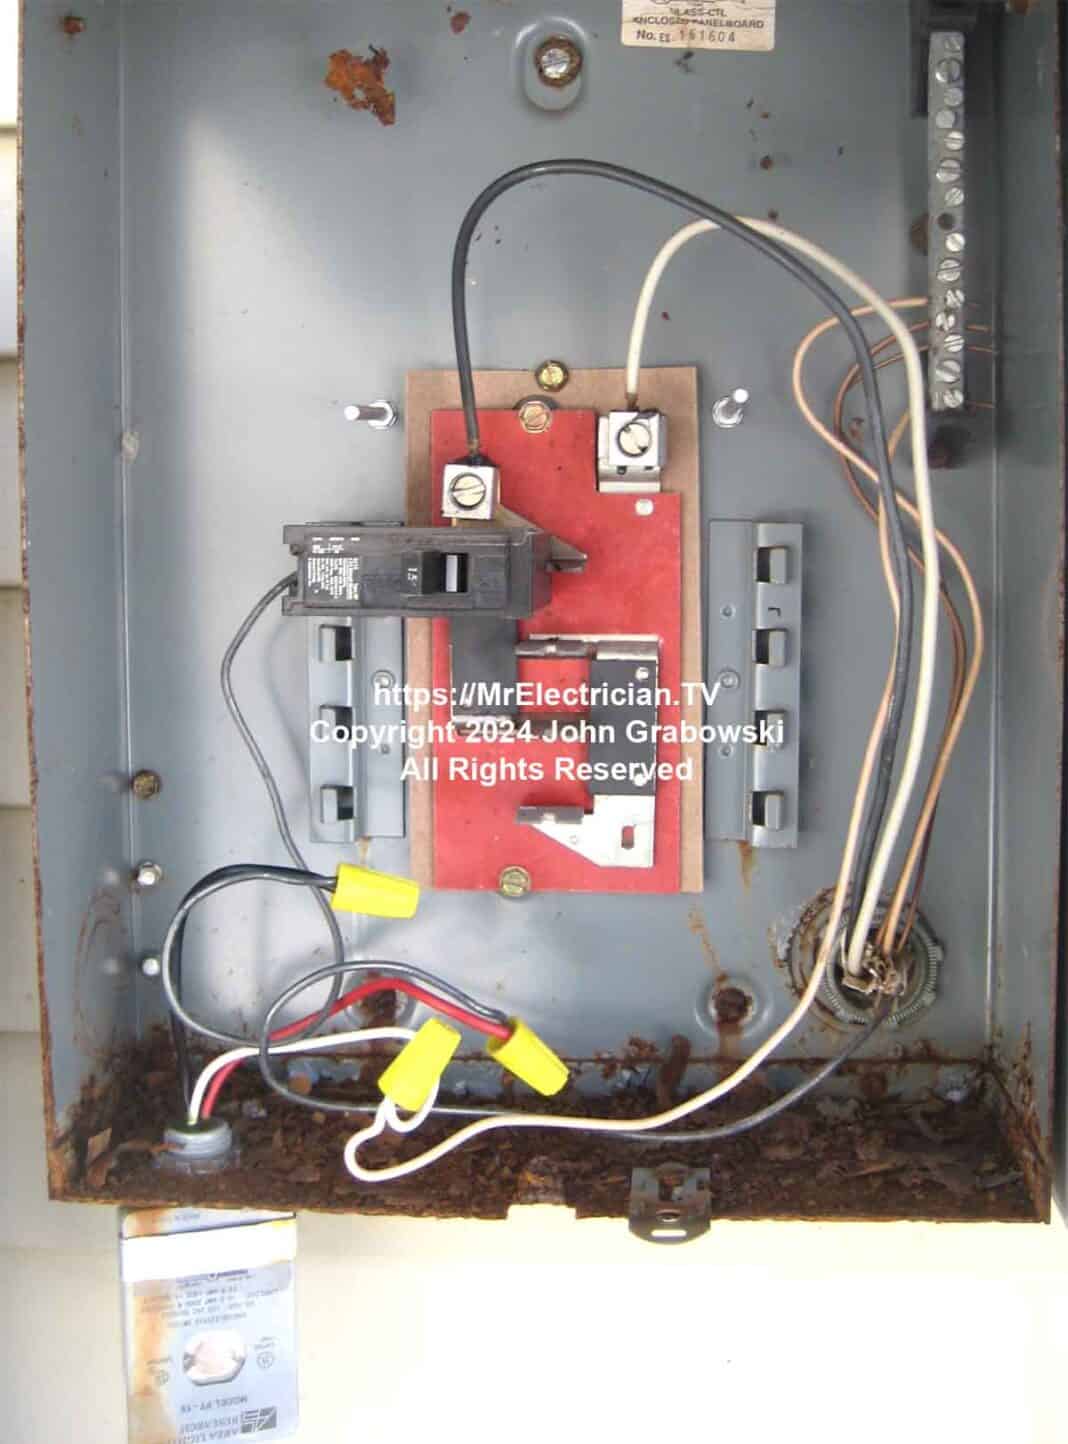 The interior of an active outdoor electrical panel with a white wire being used as one of the LINE conductors feeding the panel. The equipment grounding conductor is being used as a neutral which can cause phantom voltage.